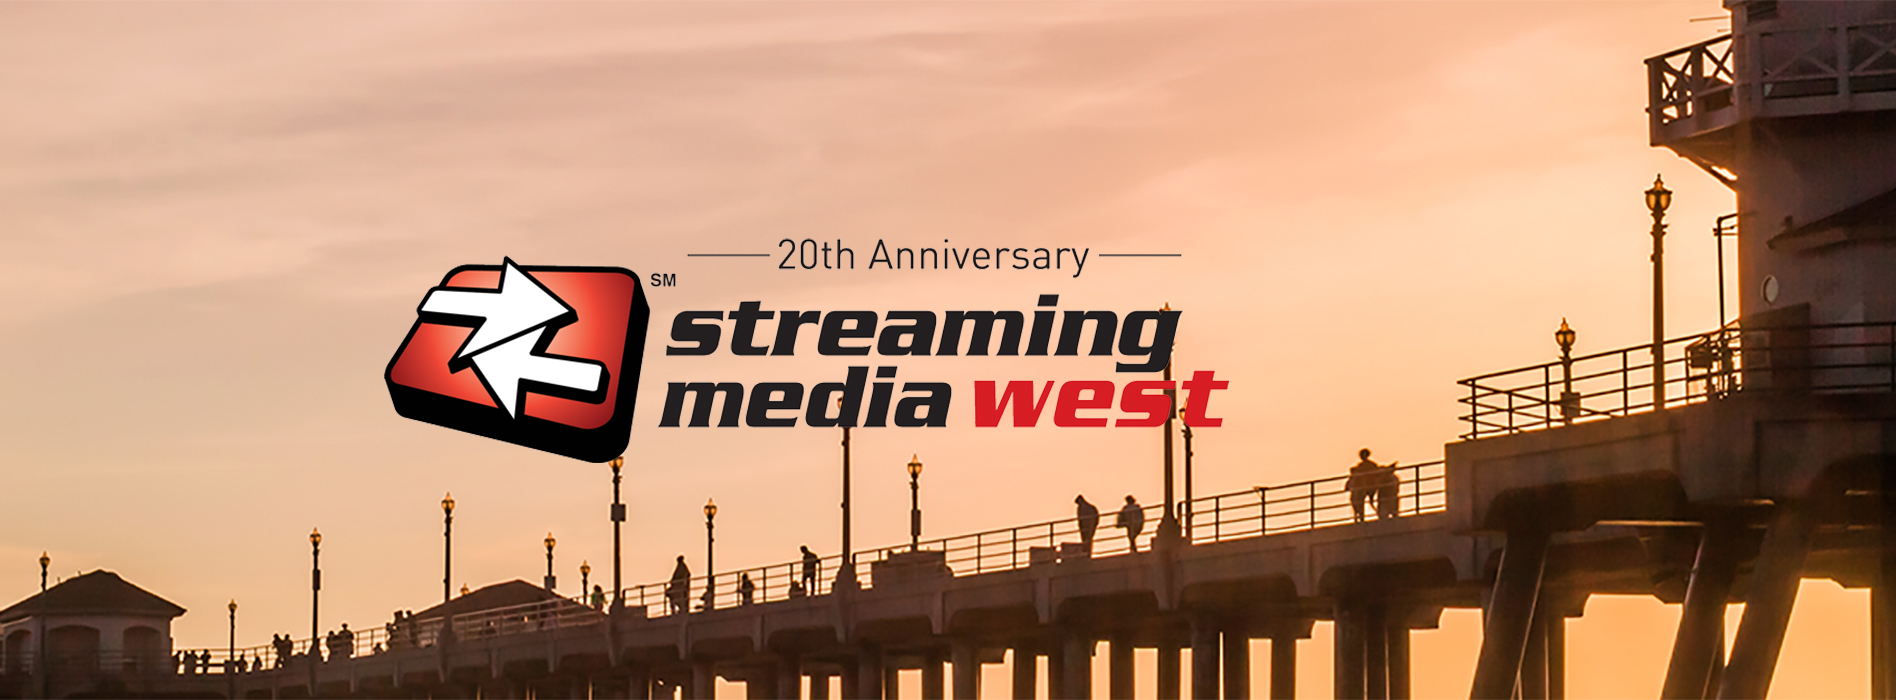 Download Handouts and Videos from Streaming Media West - Streaming Learning Center